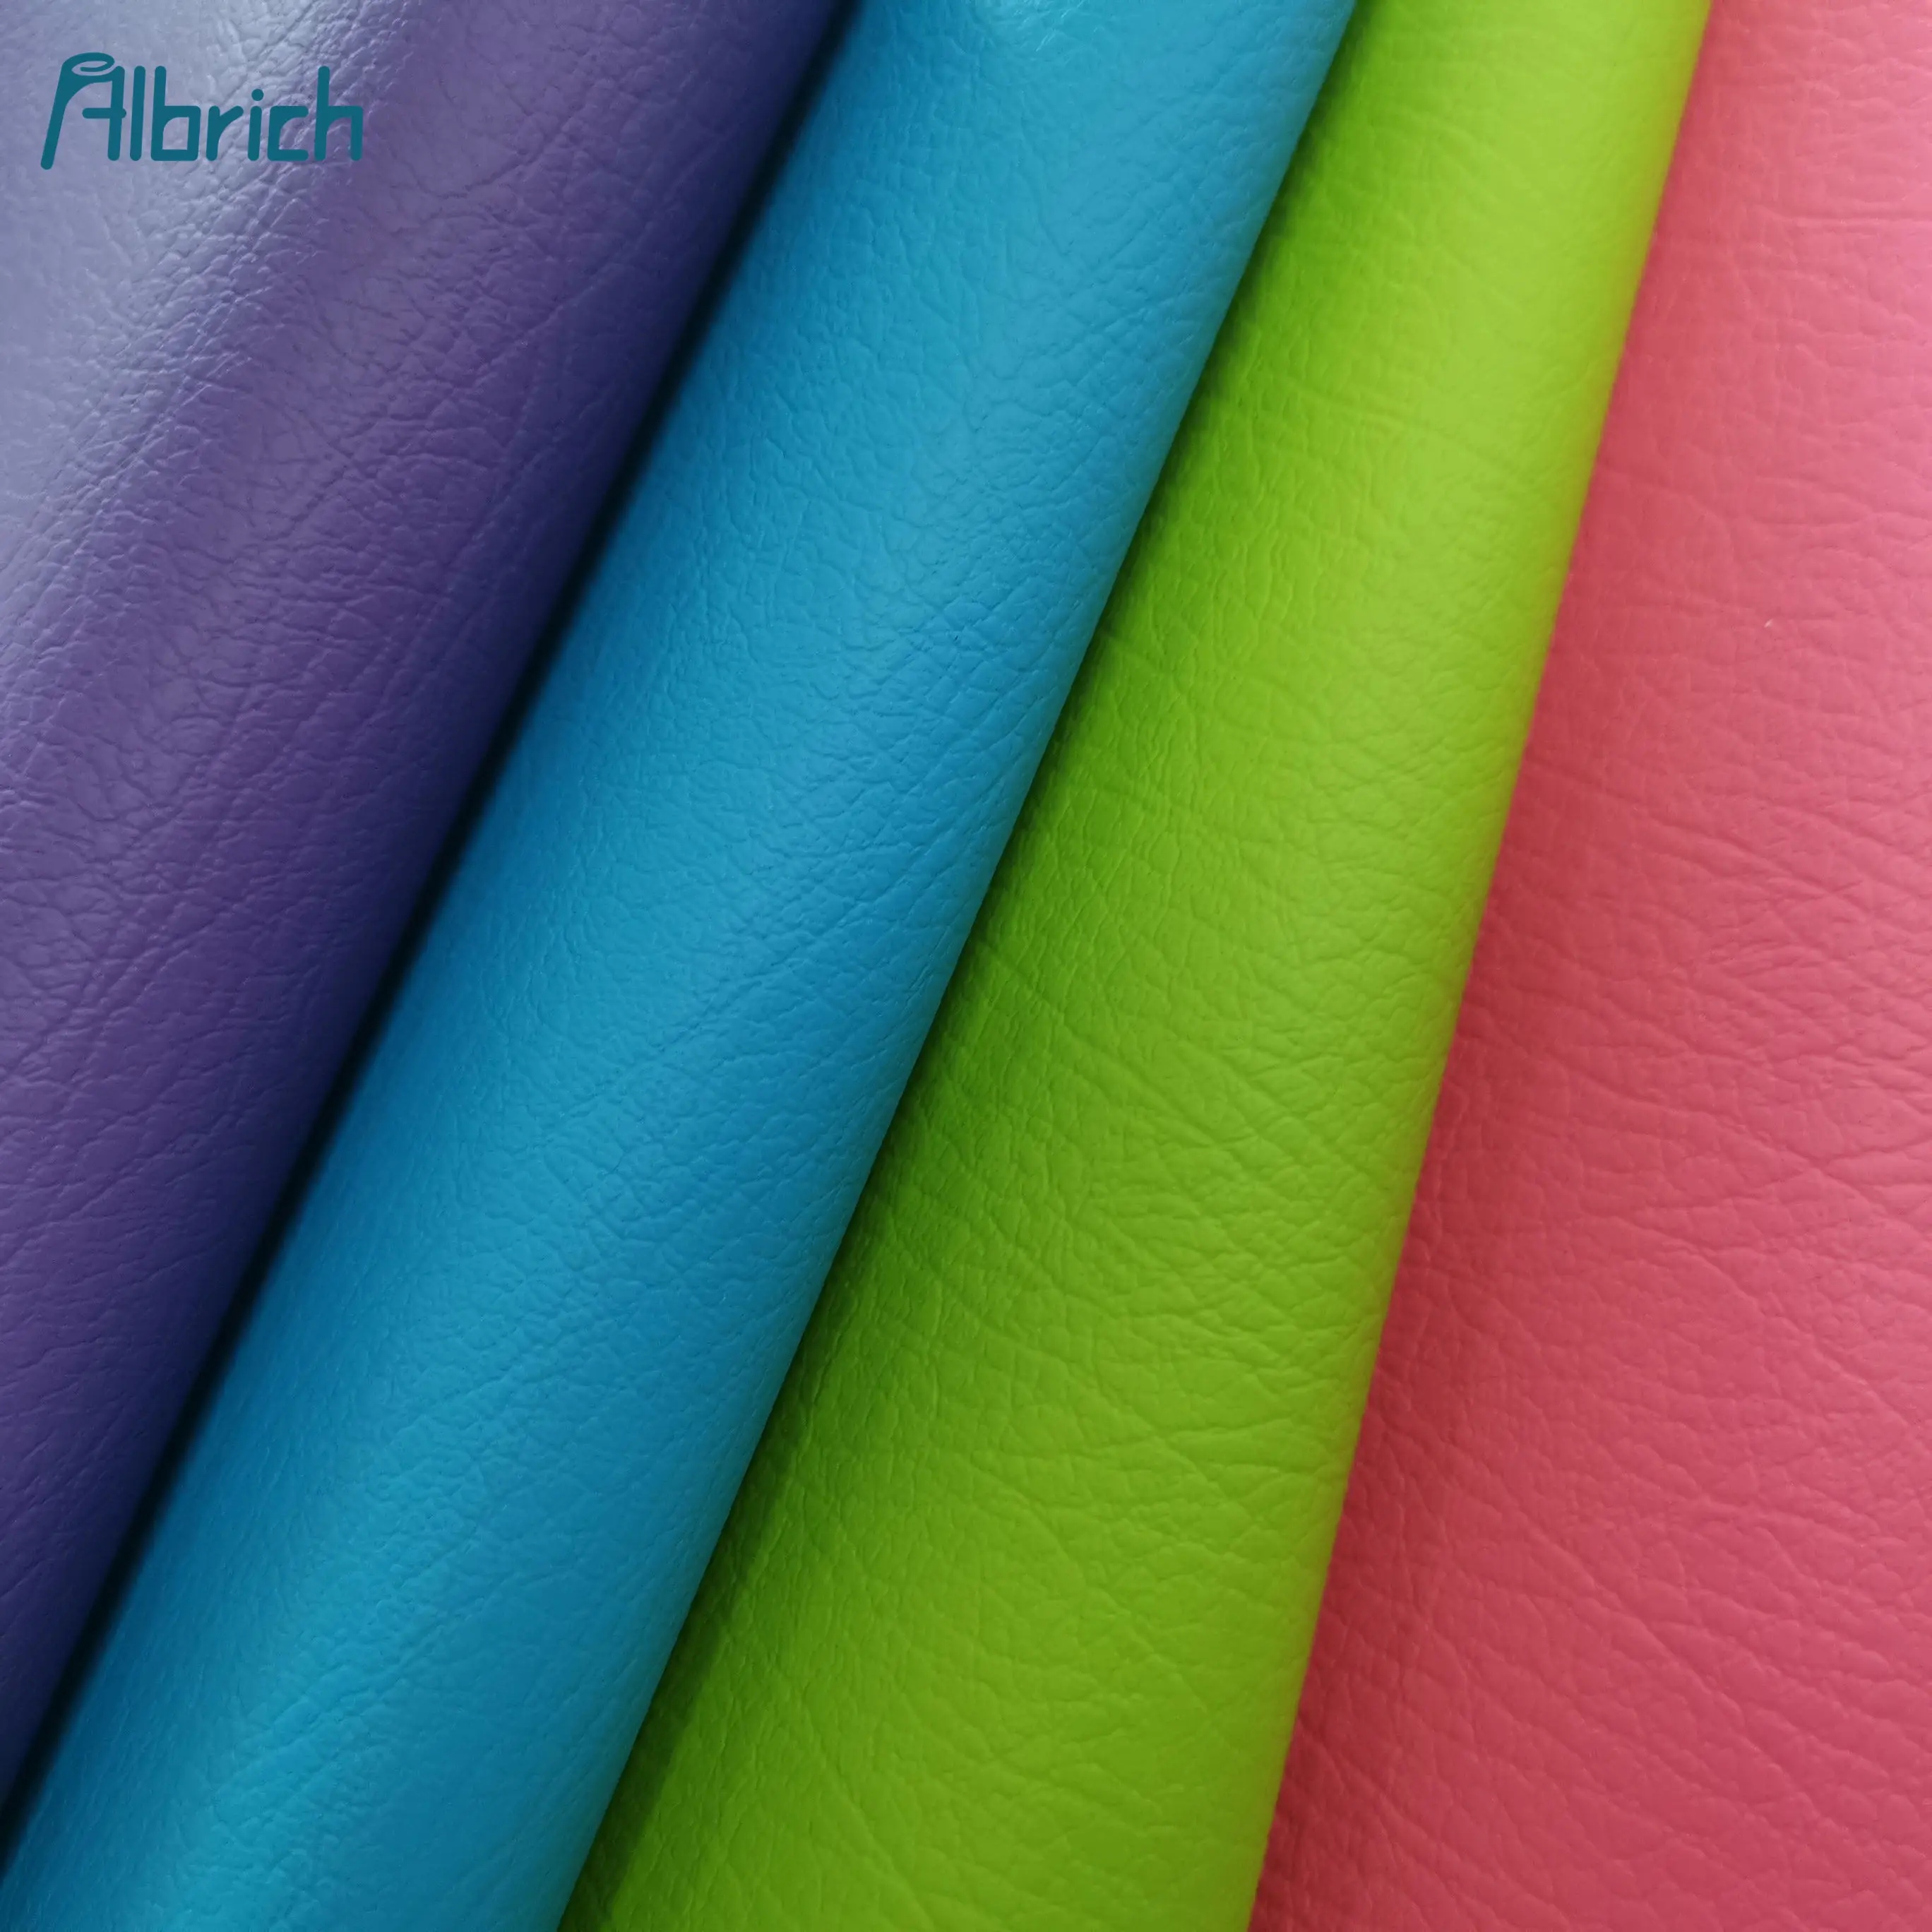 Sticker Different colors PVC vinyl fabric rexine leather artificial material for sofa